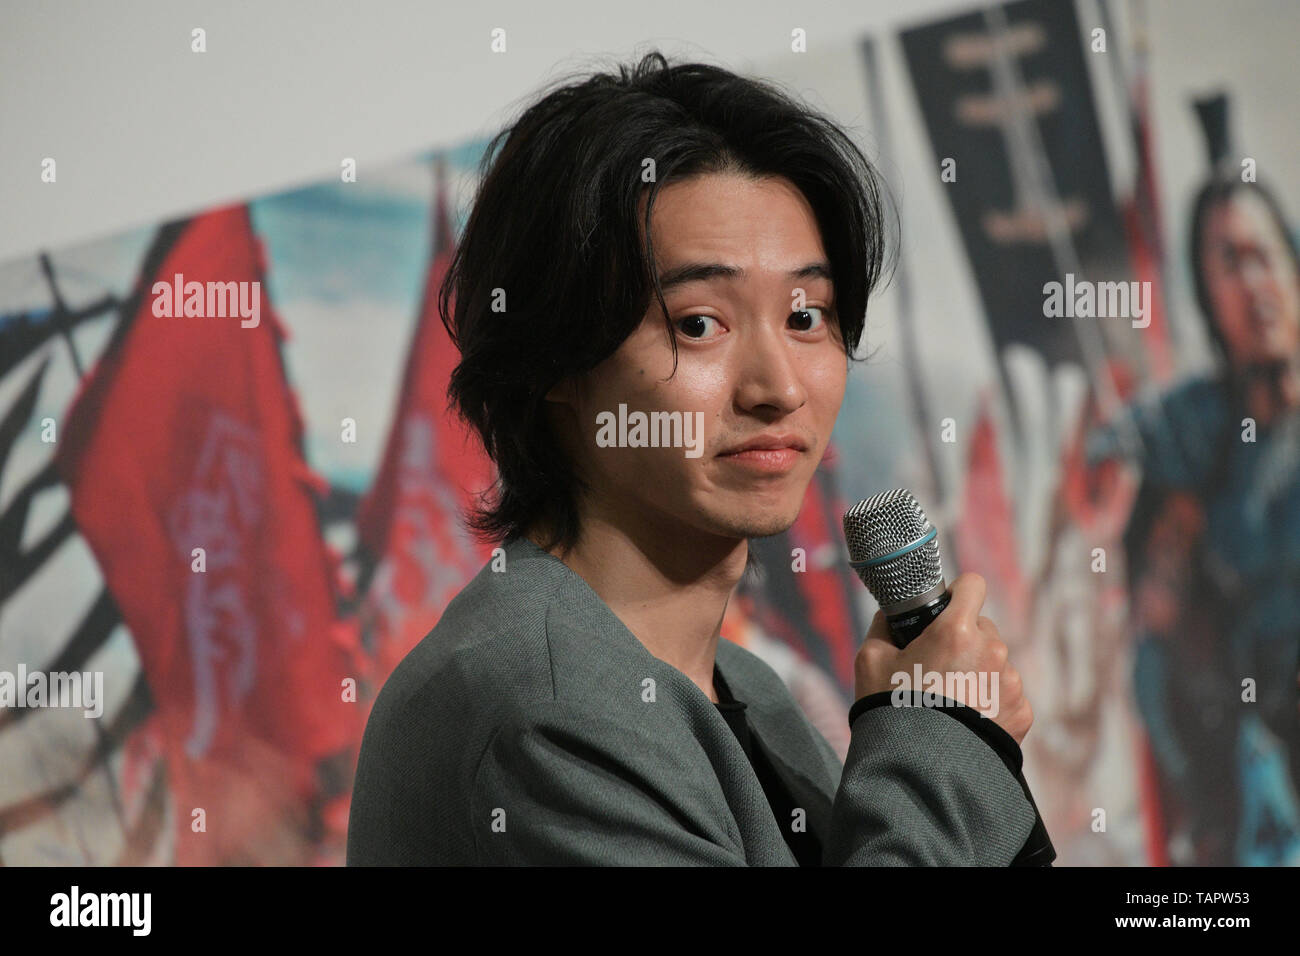 Singapore. 27th May, 2019. Japanese actor Kento Yamazaki attends a press conference for the film 'Kingdom' at Marina Bay Sands in Singapore, May 27, 2019. Credit: Then Chih Wey/Xinhua/Alamy Live News Stock Photo